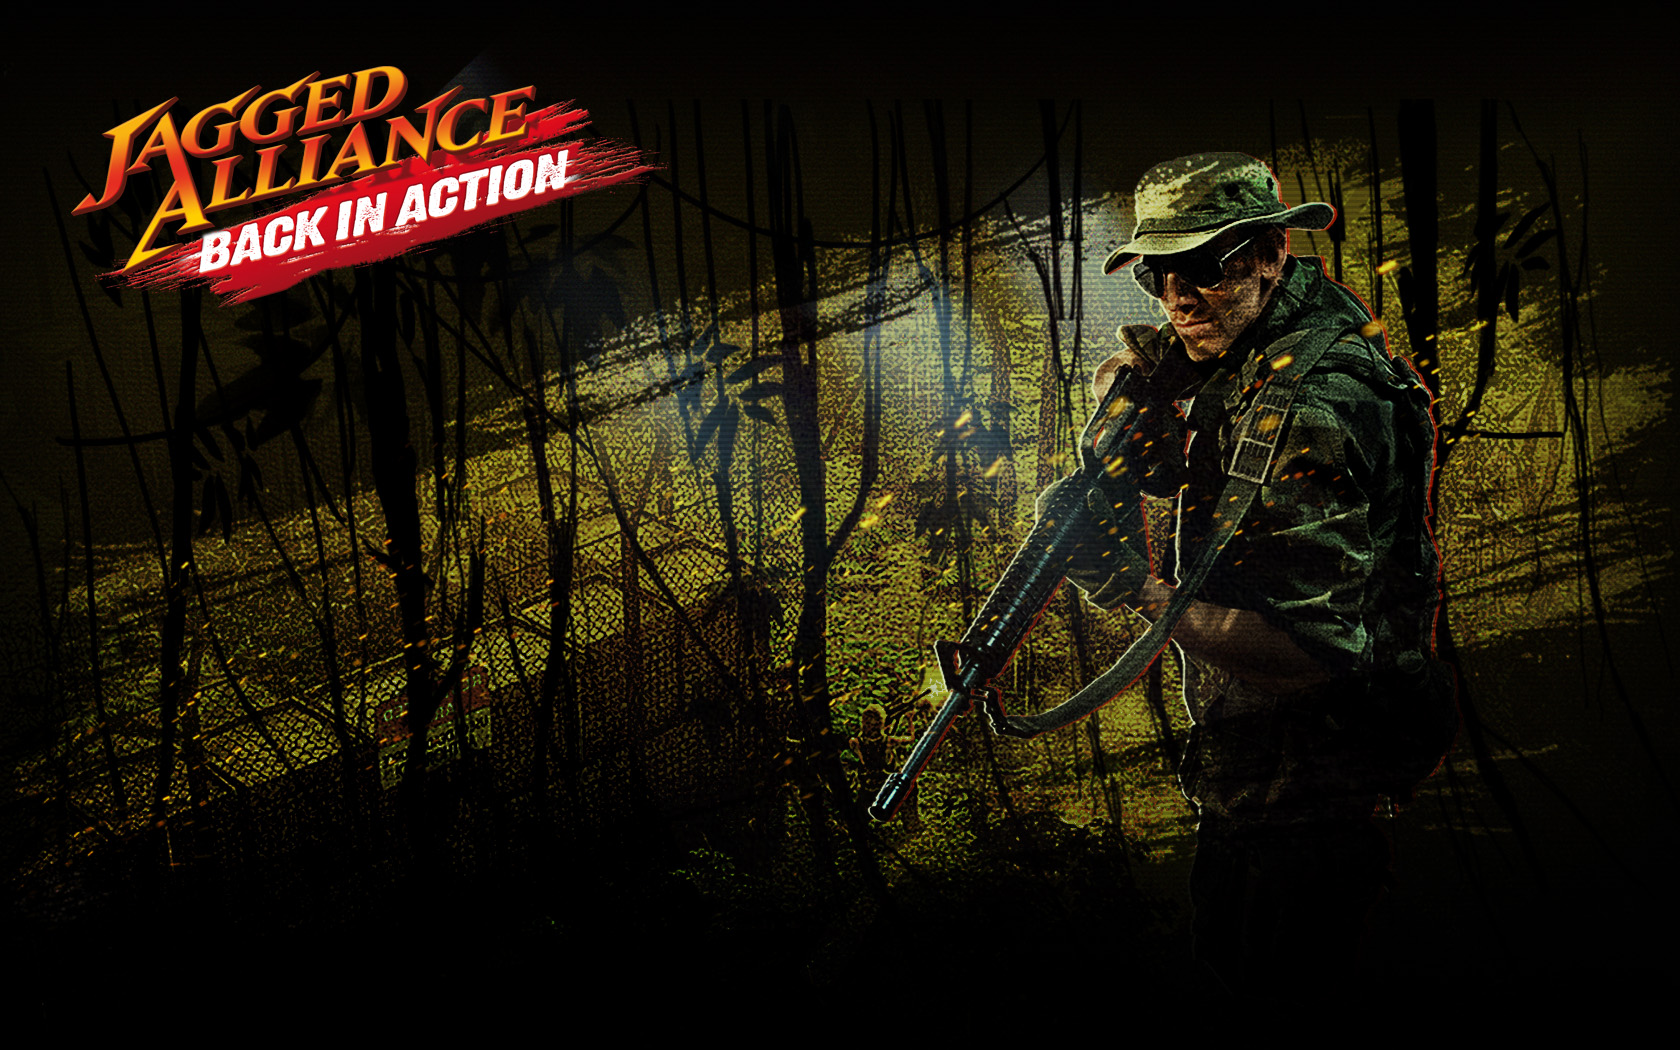 Jagged Alliance Back in Action Wallpaper 03